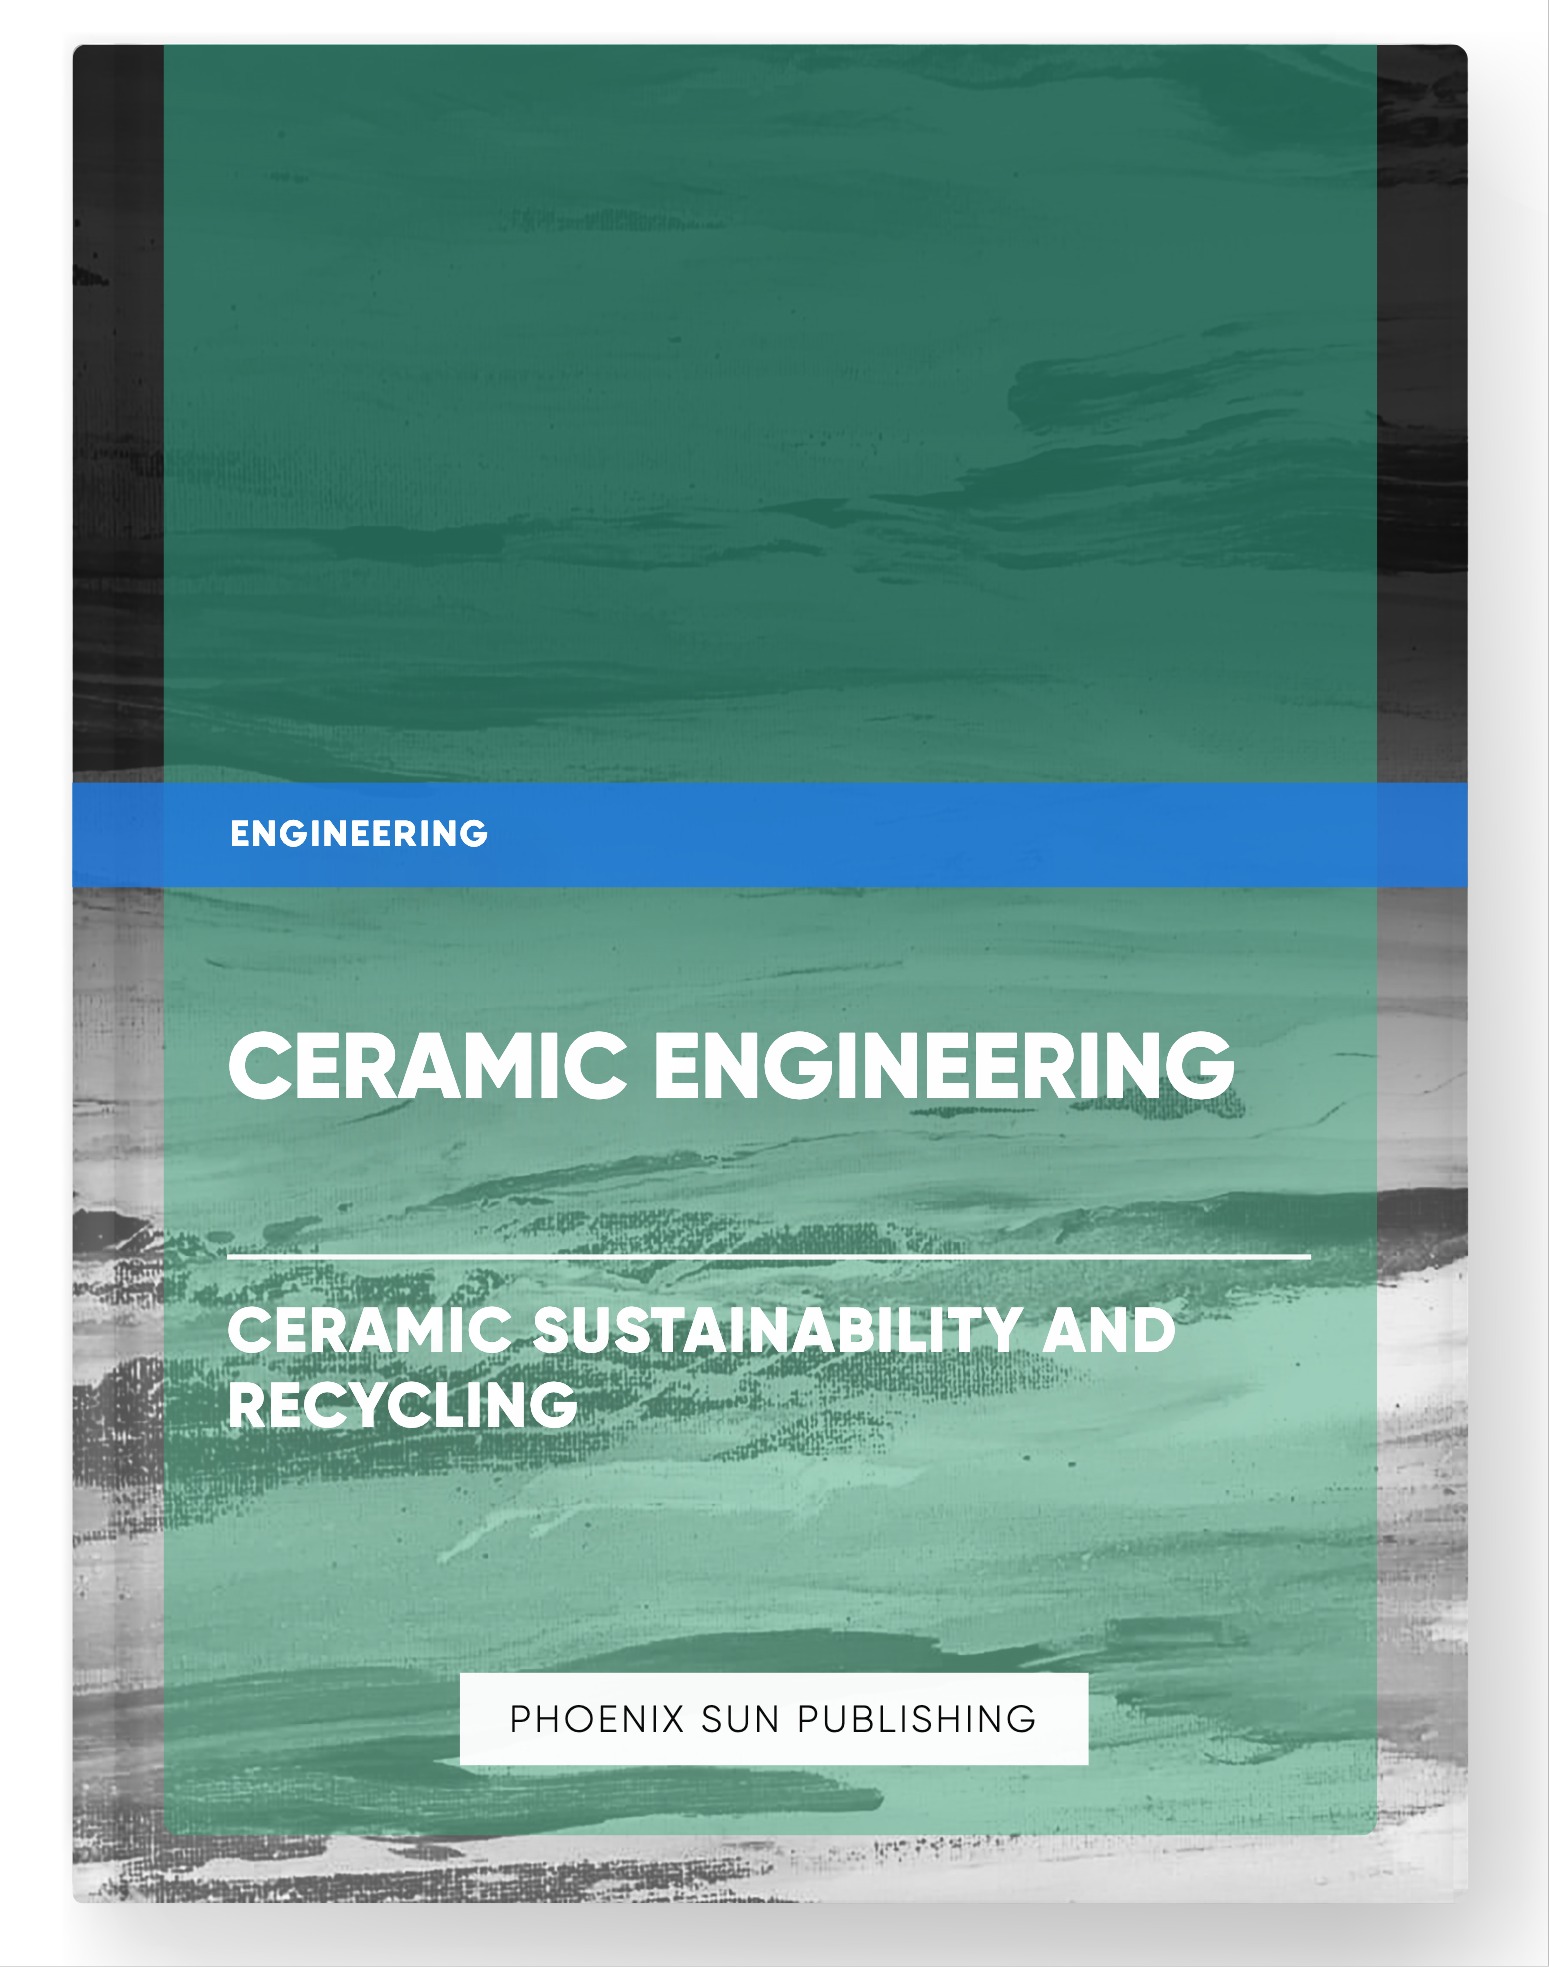 Ceramic Engineering – Ceramic Sustainability and Recycling